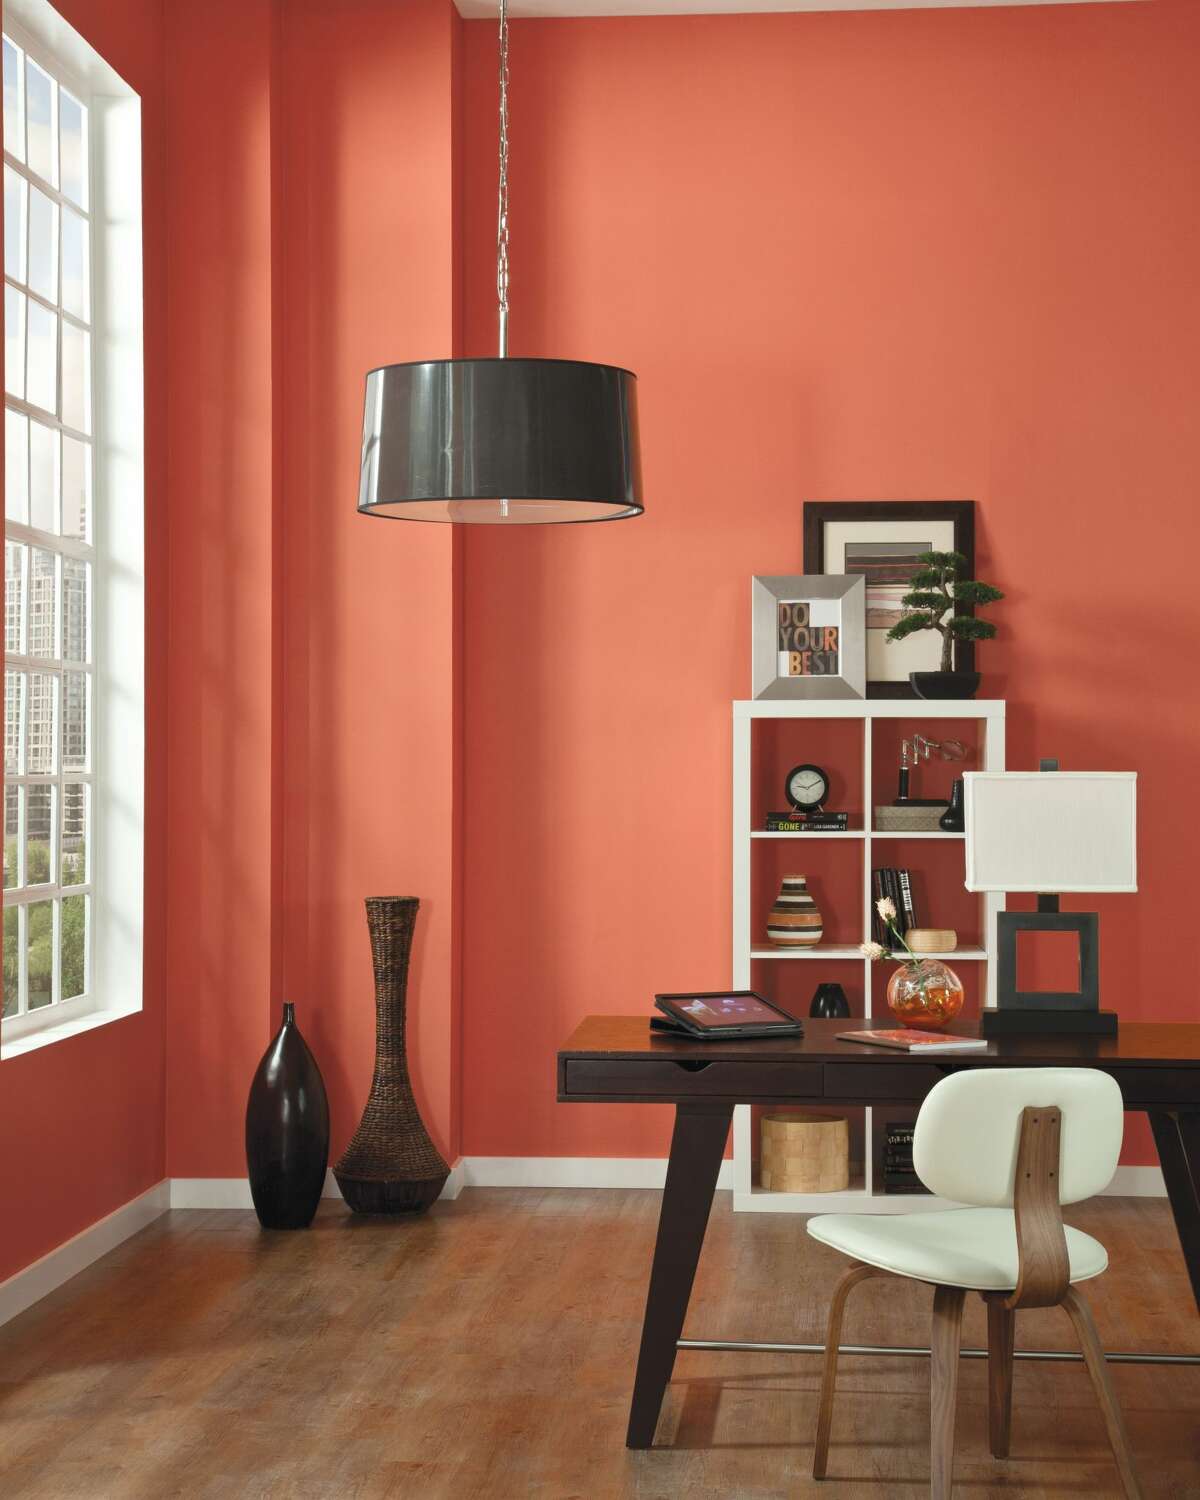 Pantone claims "Living Coral" for its 2019 Color of the Year